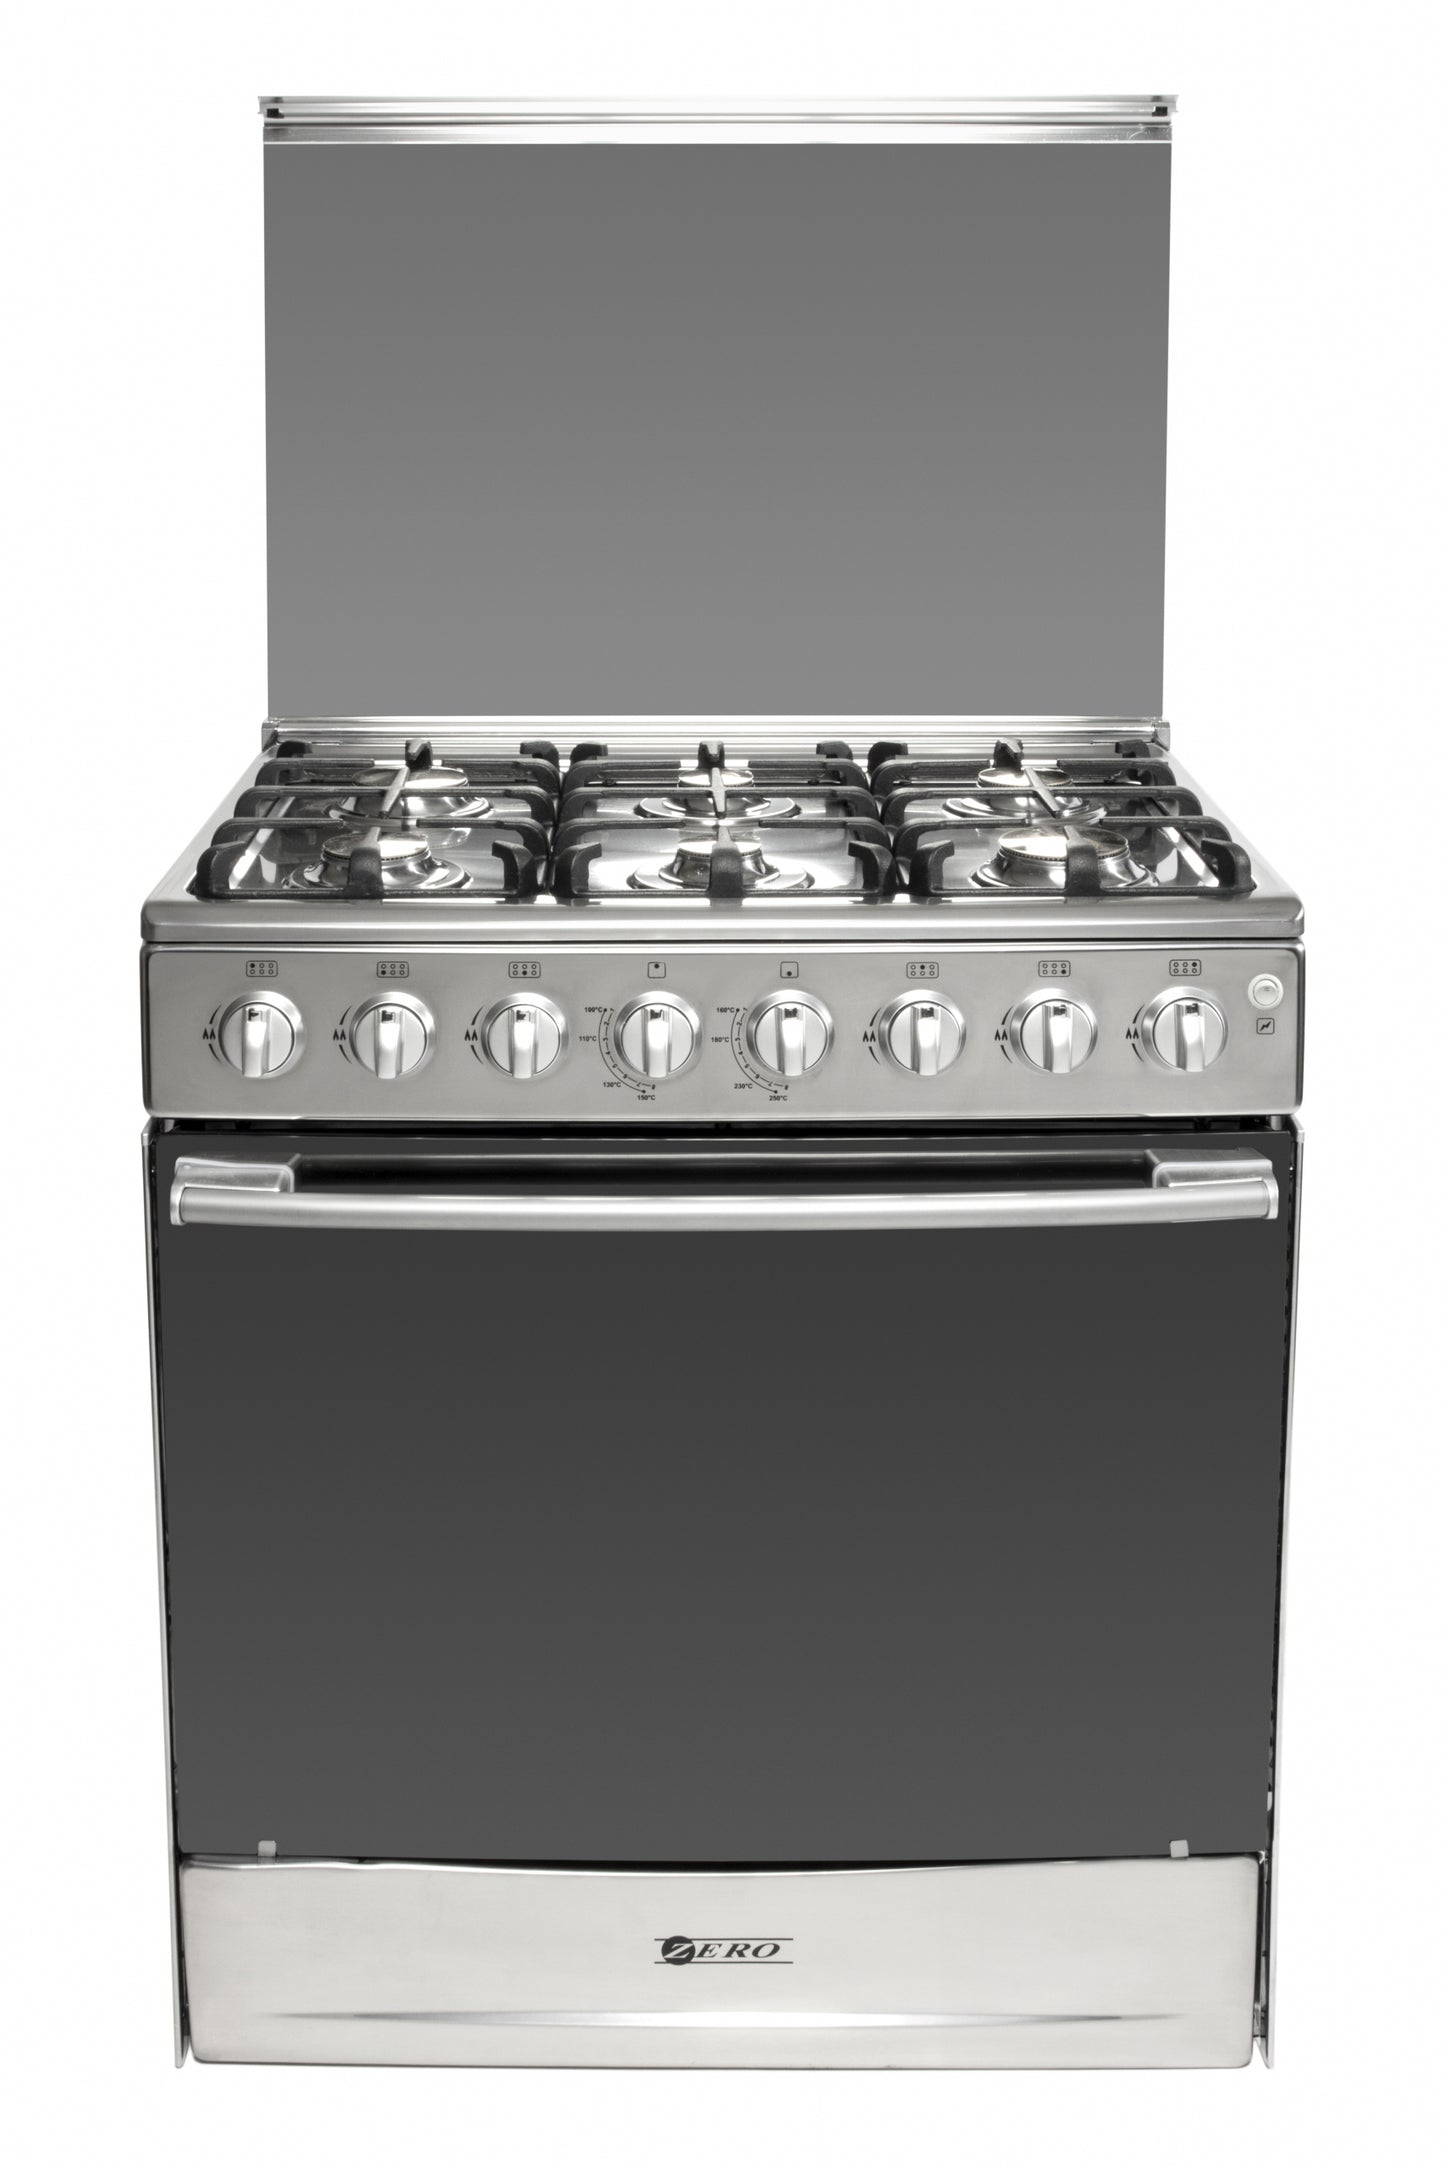 ZERO 6 PLATE STAINLESS STEEL GAS OVEN GRILL